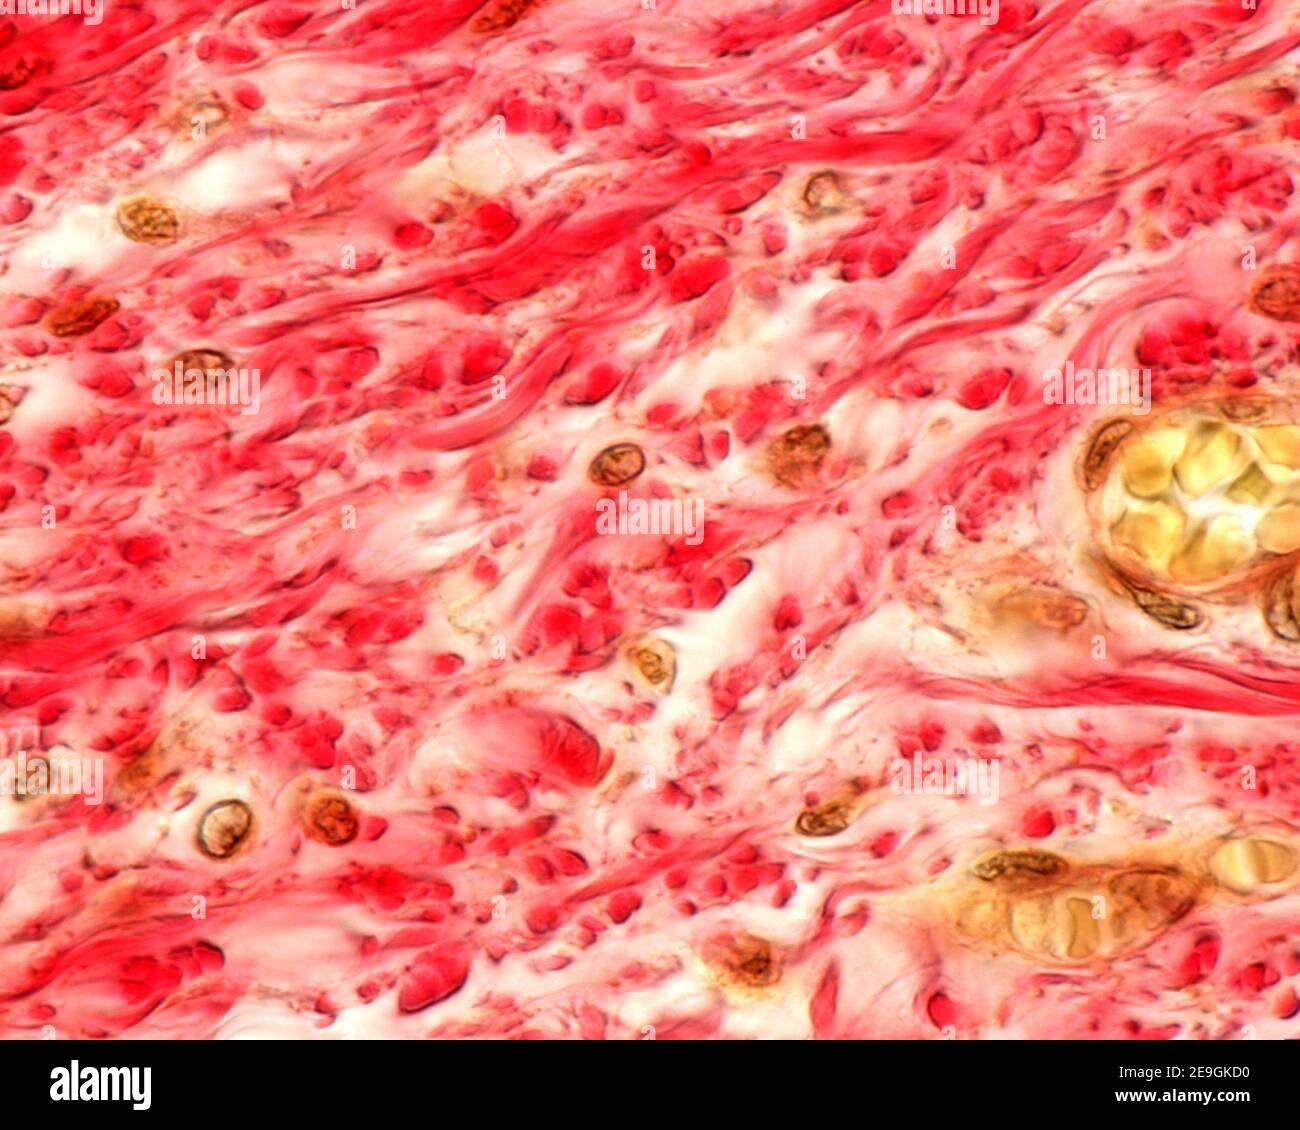 Numerous bundles of collagen fibres selectively stained in red. Submucosa layer of the esophagus, Van Gieson method. Stock Photo